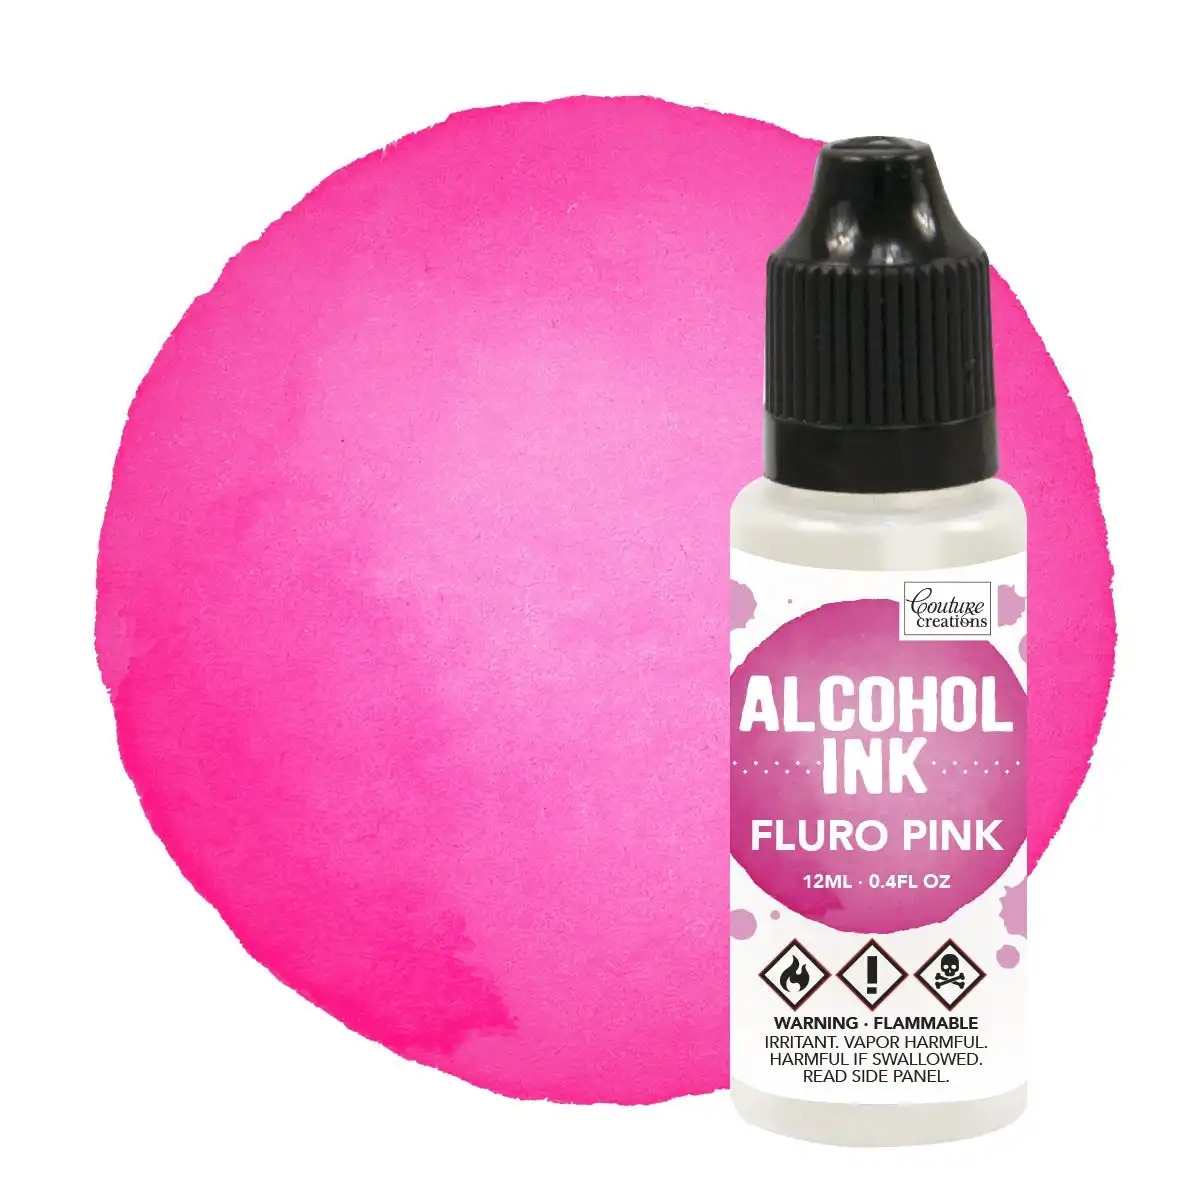 Couture Creations Alcohol Ink - Fluro Pink - 12ml